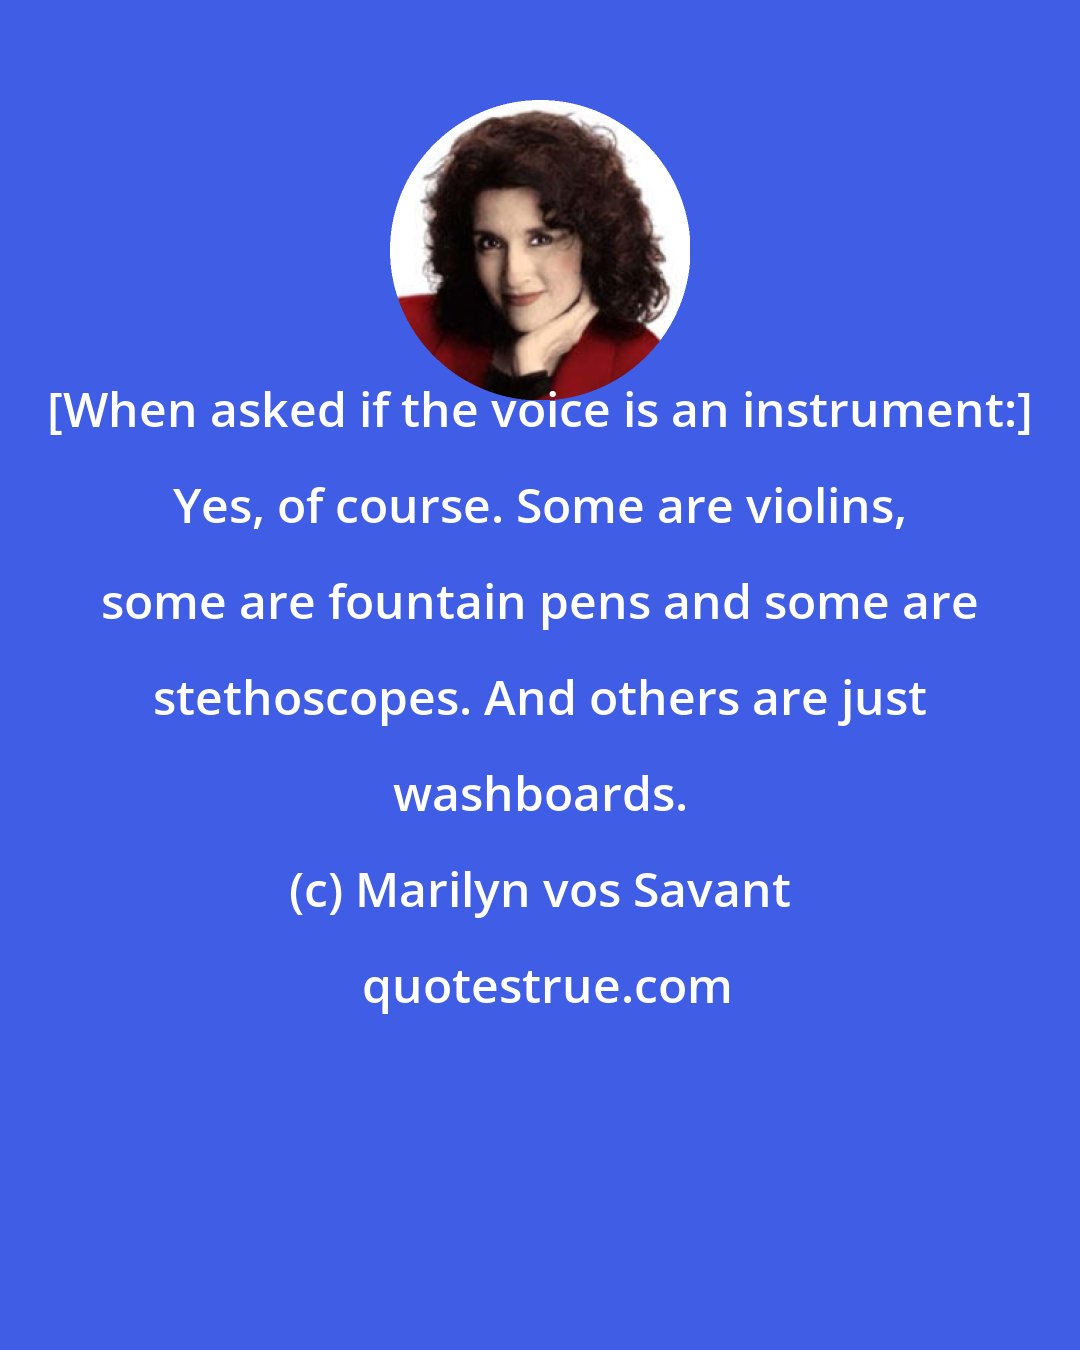 Marilyn vos Savant: [When asked if the voice is an instrument:] Yes, of course. Some are violins, some are fountain pens and some are stethoscopes. And others are just washboards.